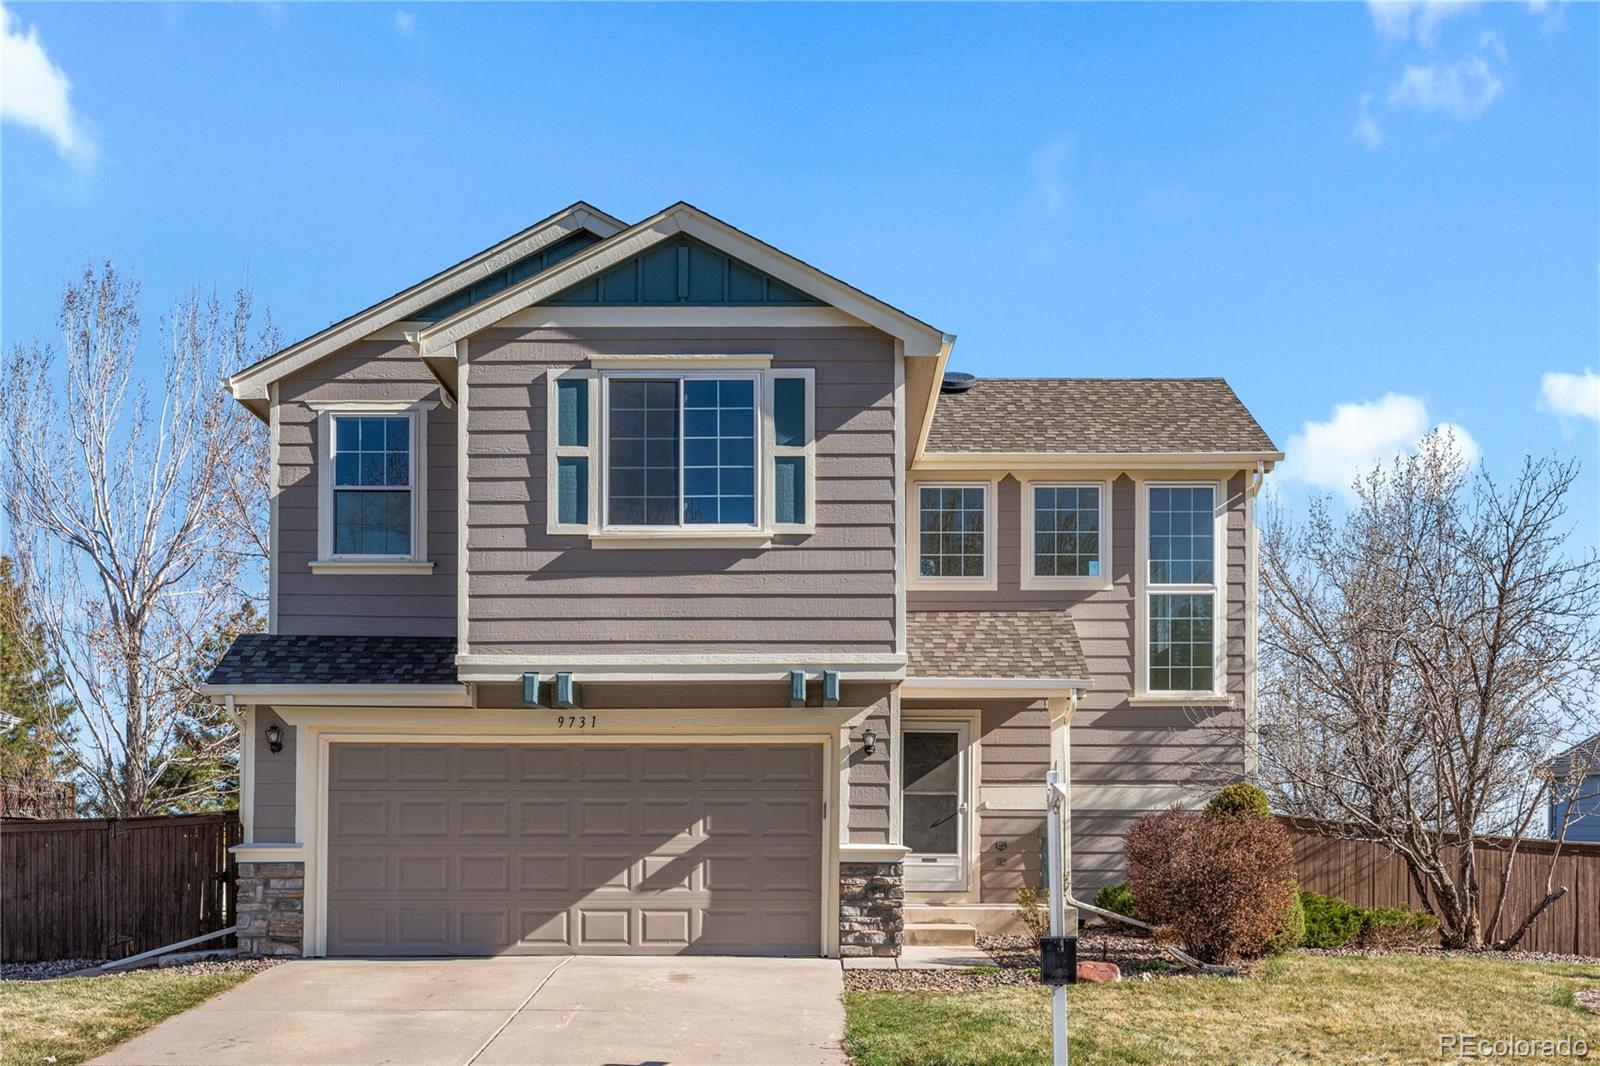 Report Image for 9731  Burberry Way,Highlands Ranch, Colorado